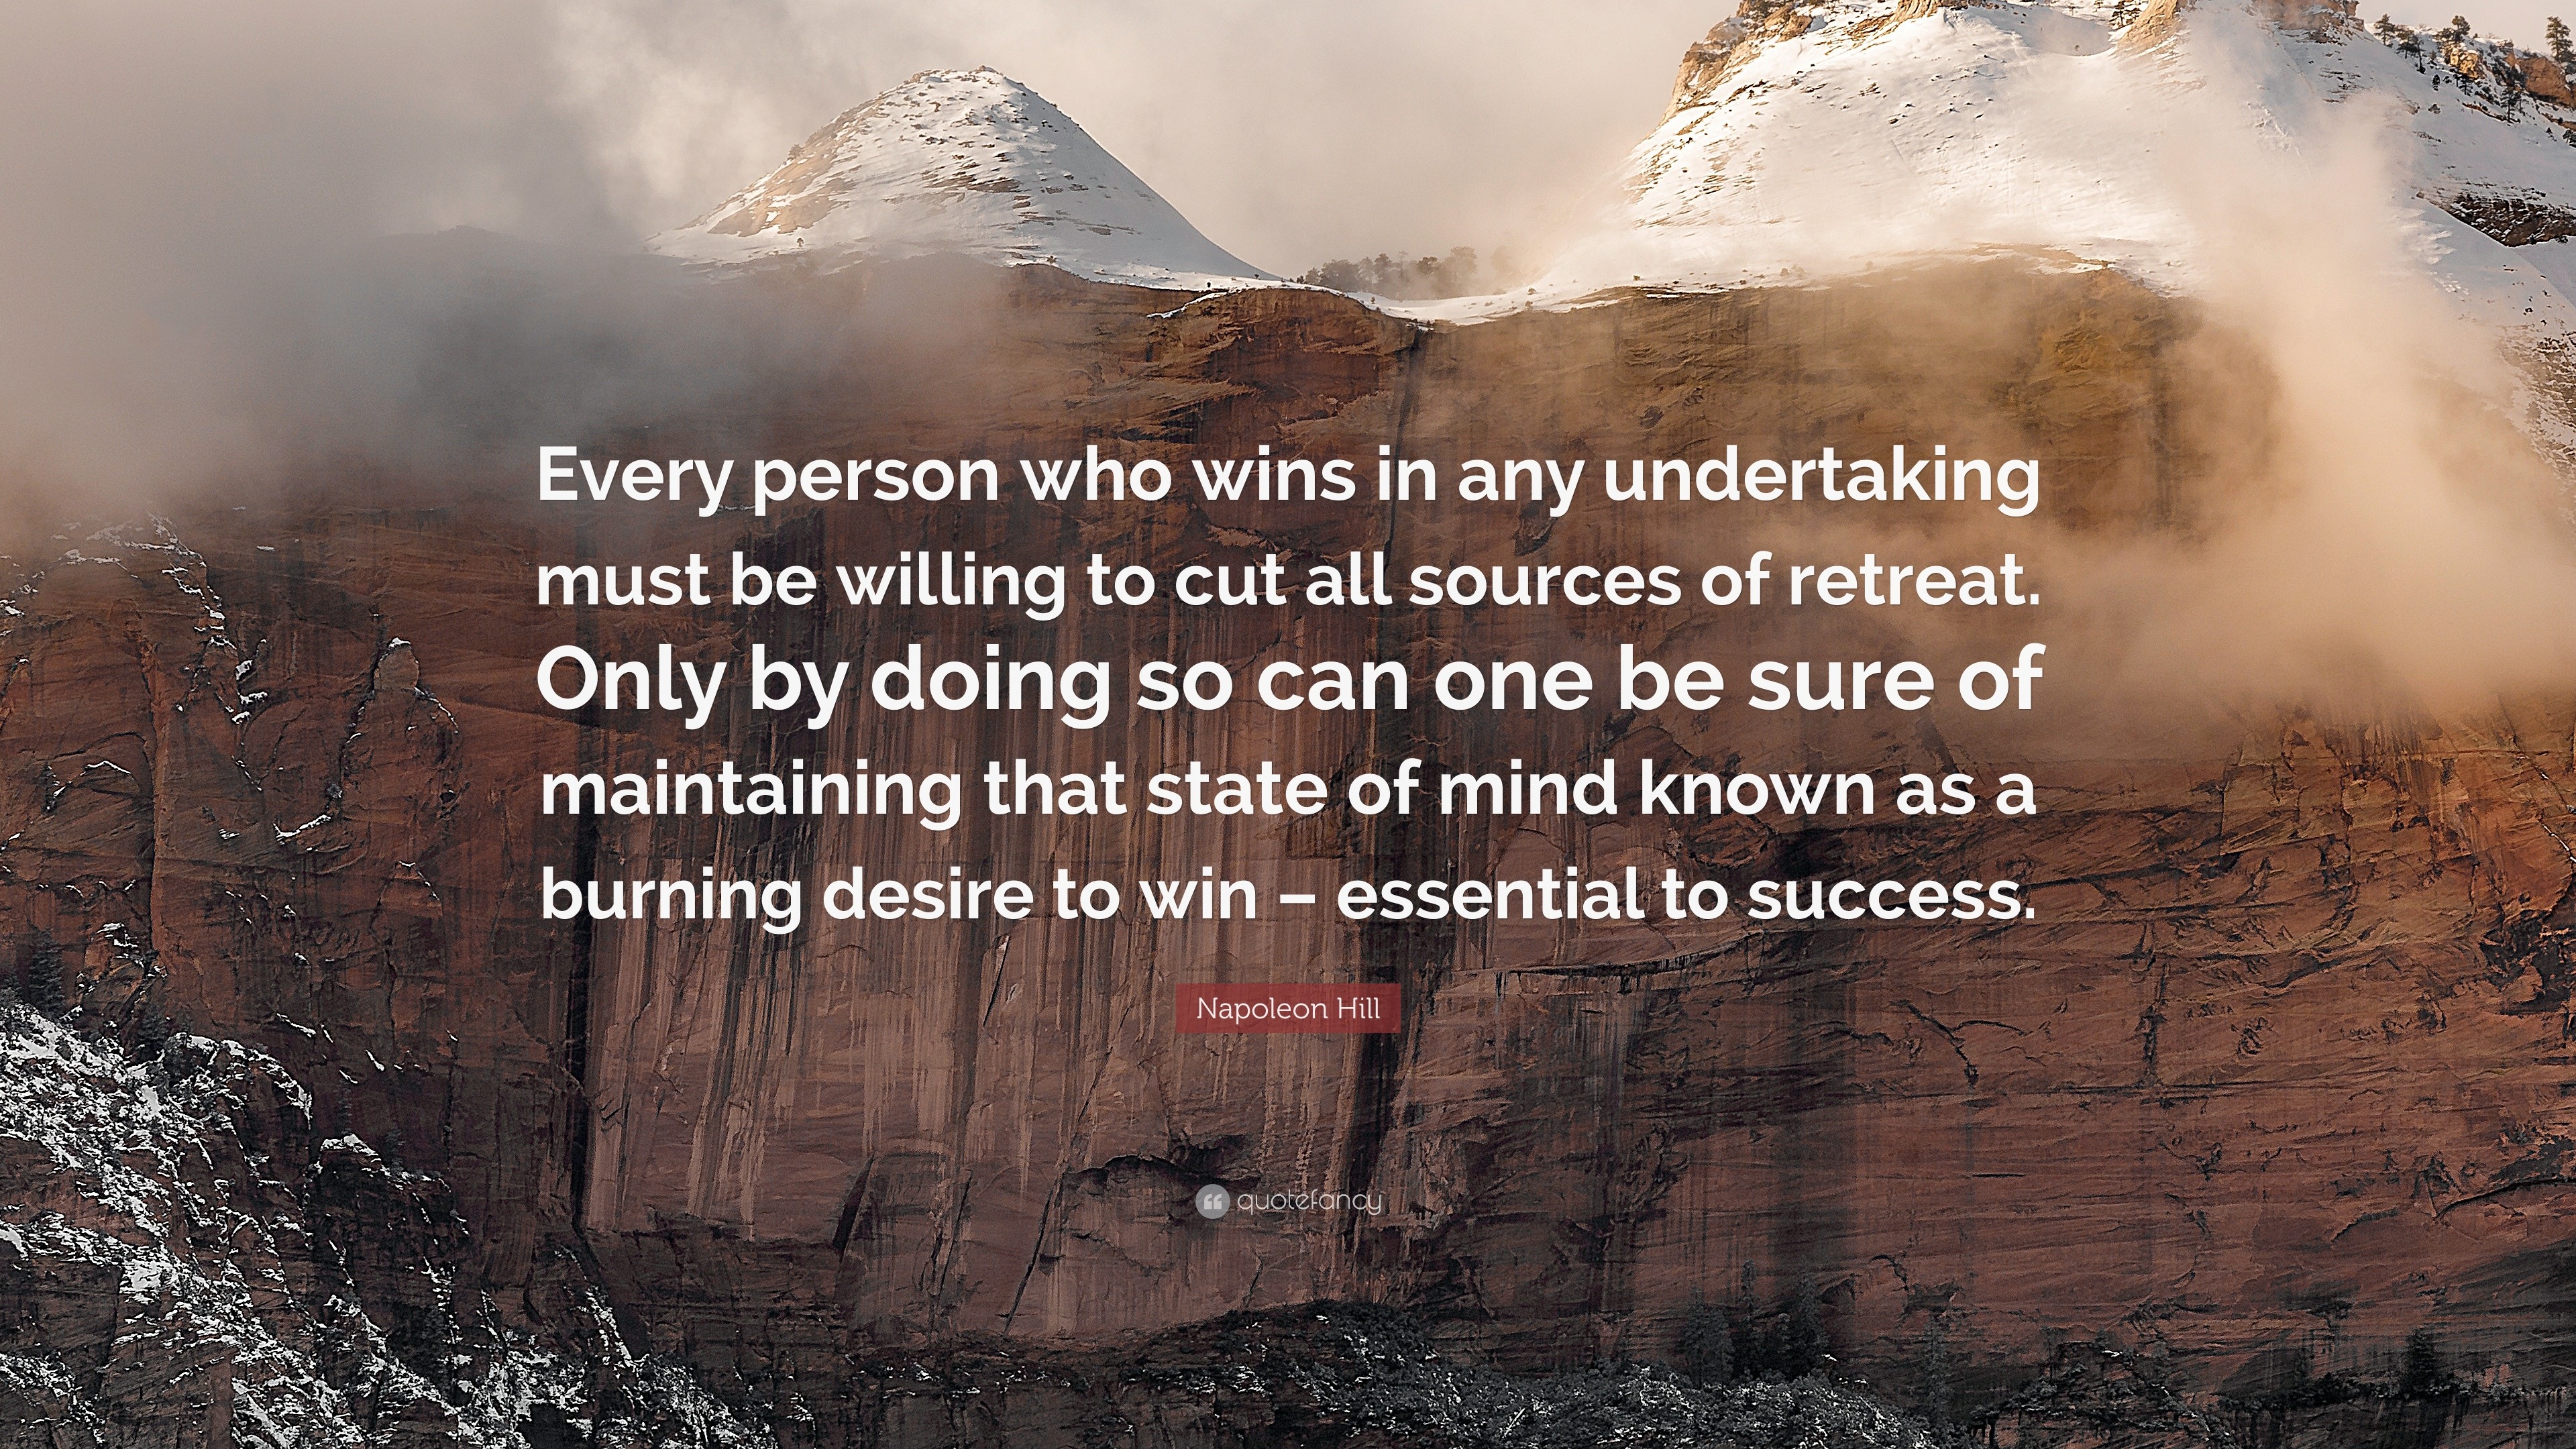 Napoleon Hill Quote: “Every person who wins in any undertaking must be ...